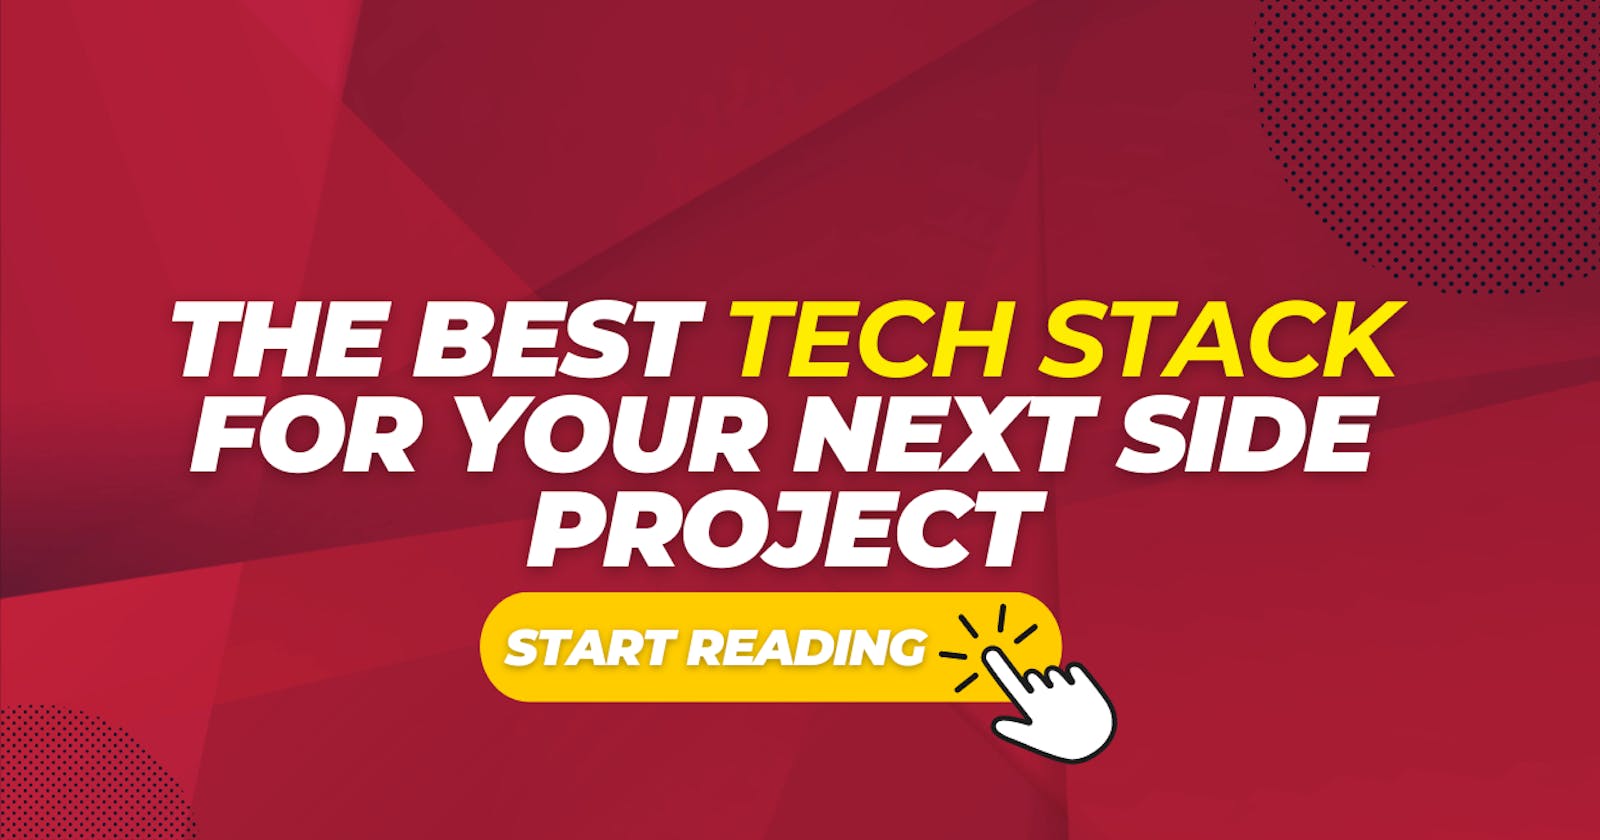 The Best Tech Stack for Your Next Side Project